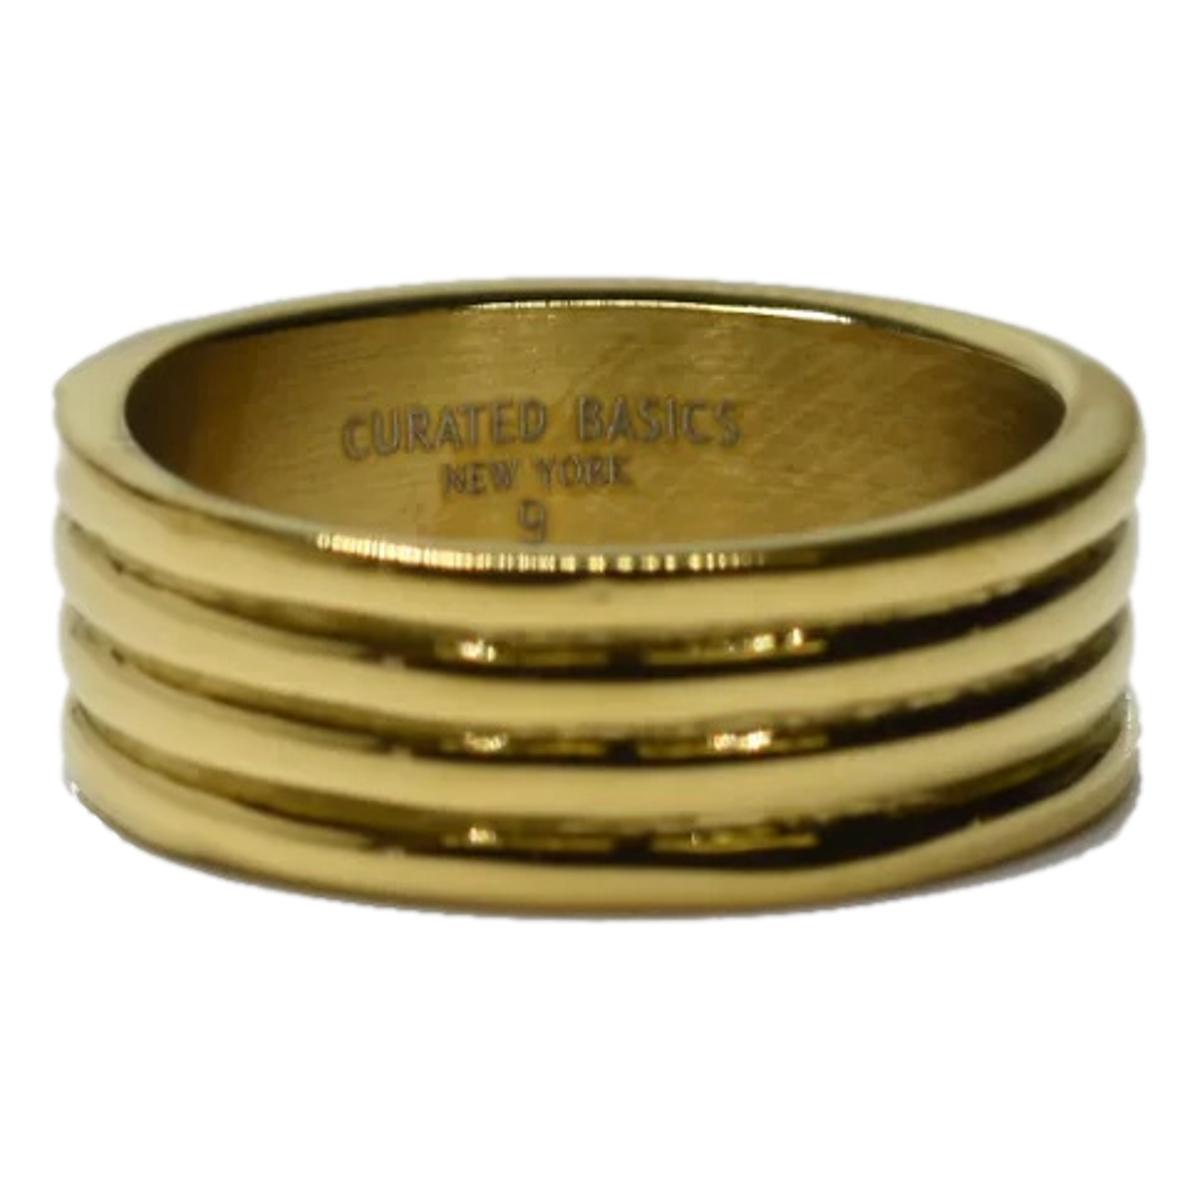 Brass Stacked Ring